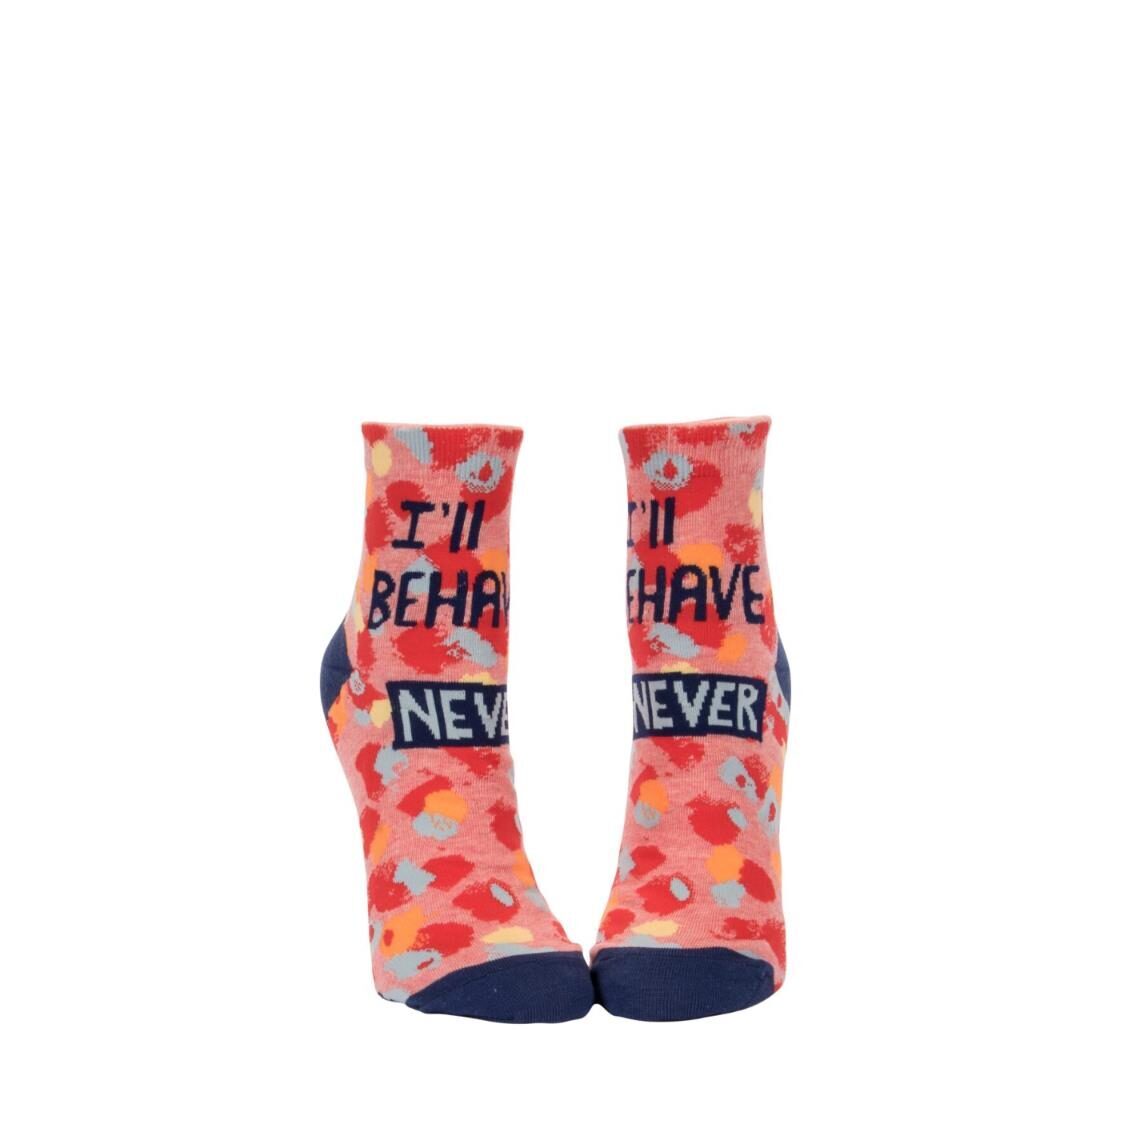 Blue Q Womens Ankle Socks - Ill Behave Never